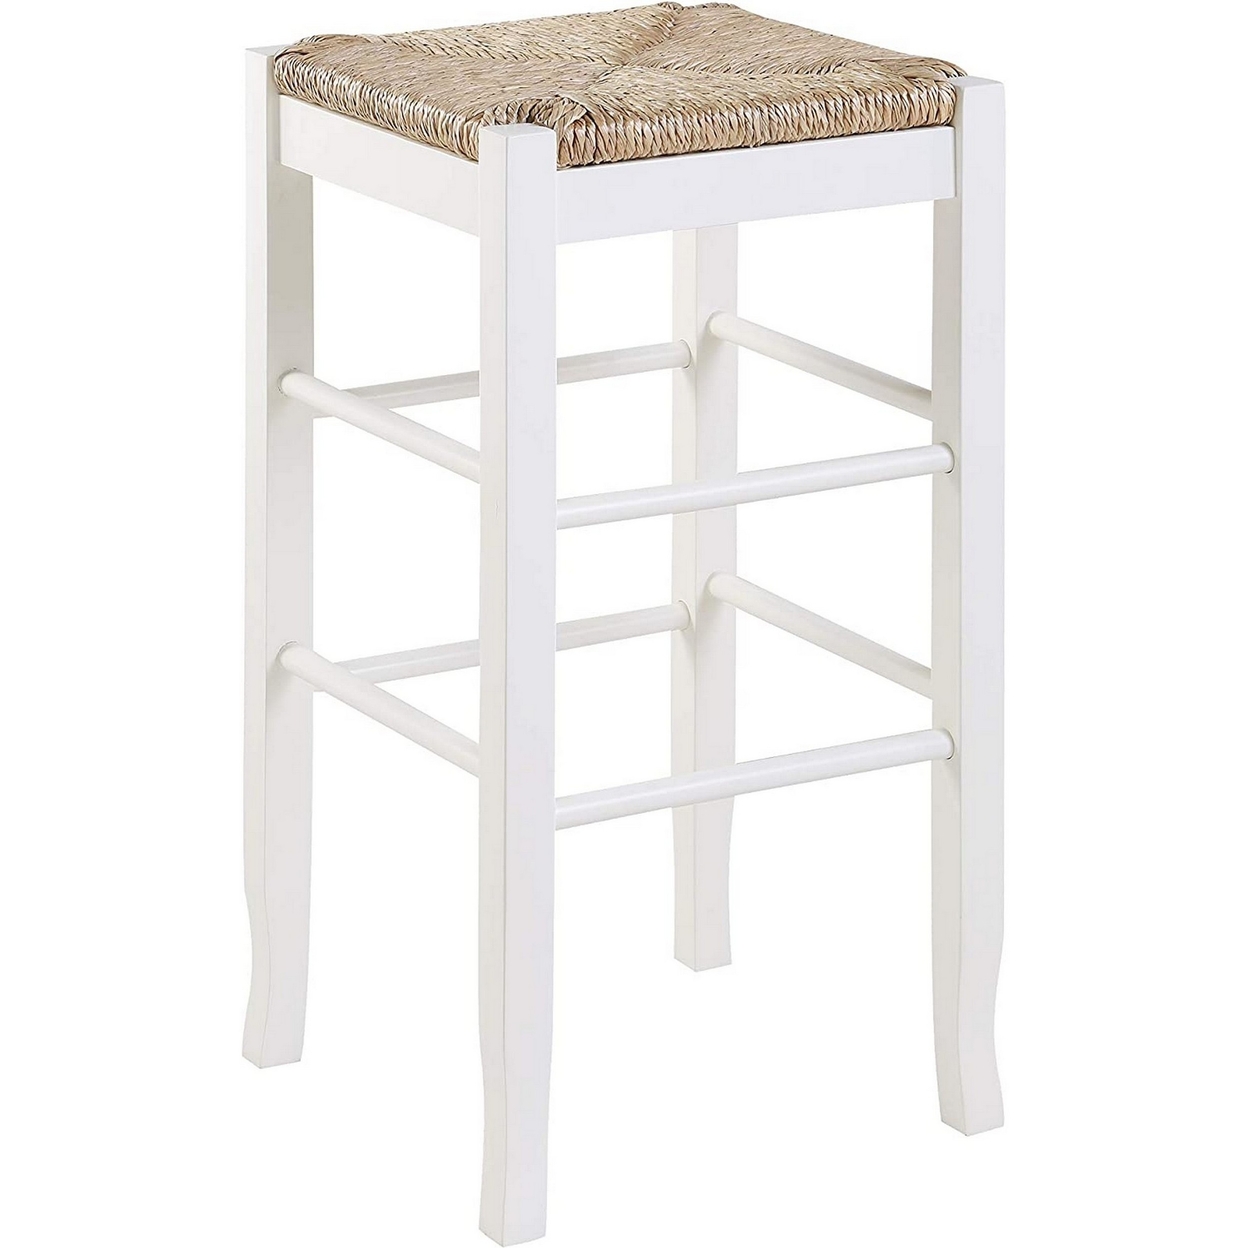 Square Wooden Frame Barstool With Hand Woven Rush, White And Brown- Saltoro Sherpi